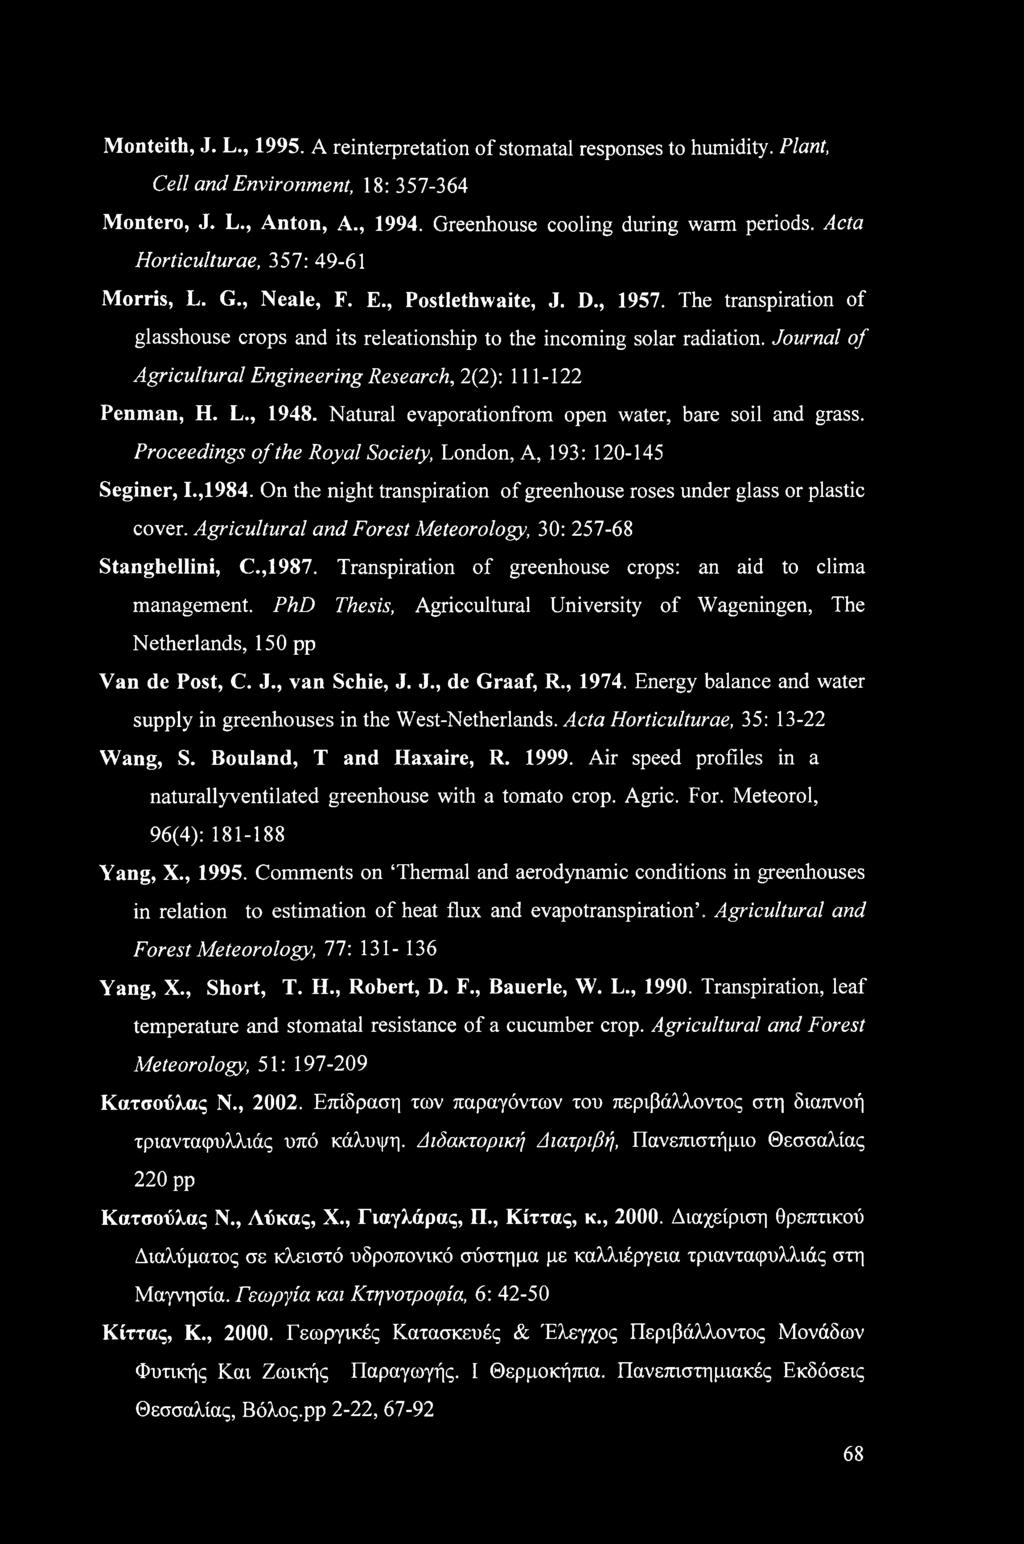 Journal of Agricultural Engineering Research, 2(2): 111-122 Penman, H. L., 1948. Natural evaporationfrom open water, bare soil and grass.